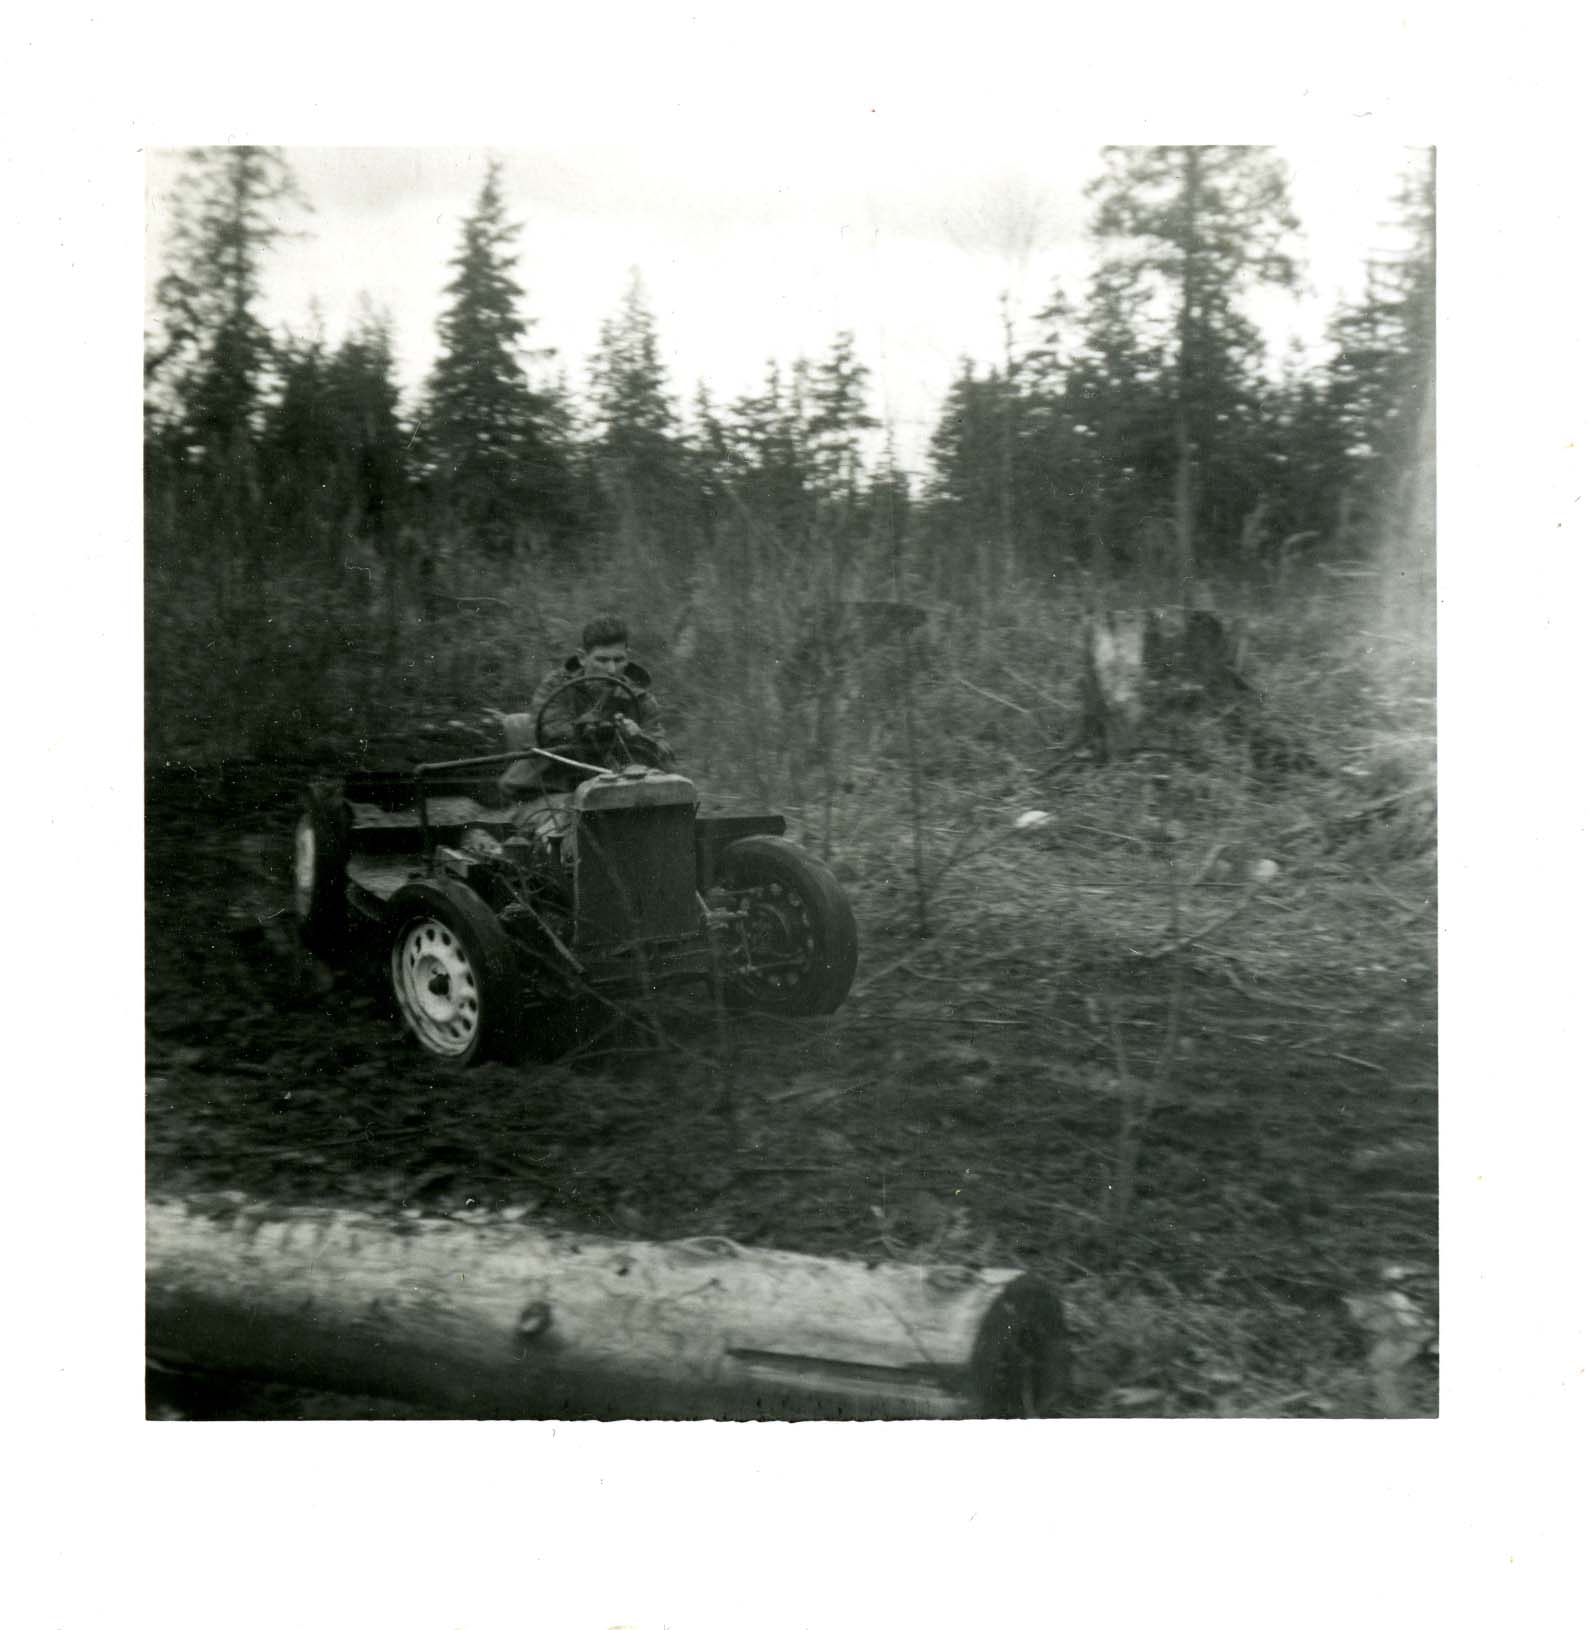 Geoff Hortin at the Mud Run, Westwood in the Late 1950s (JPG) Opens in new window